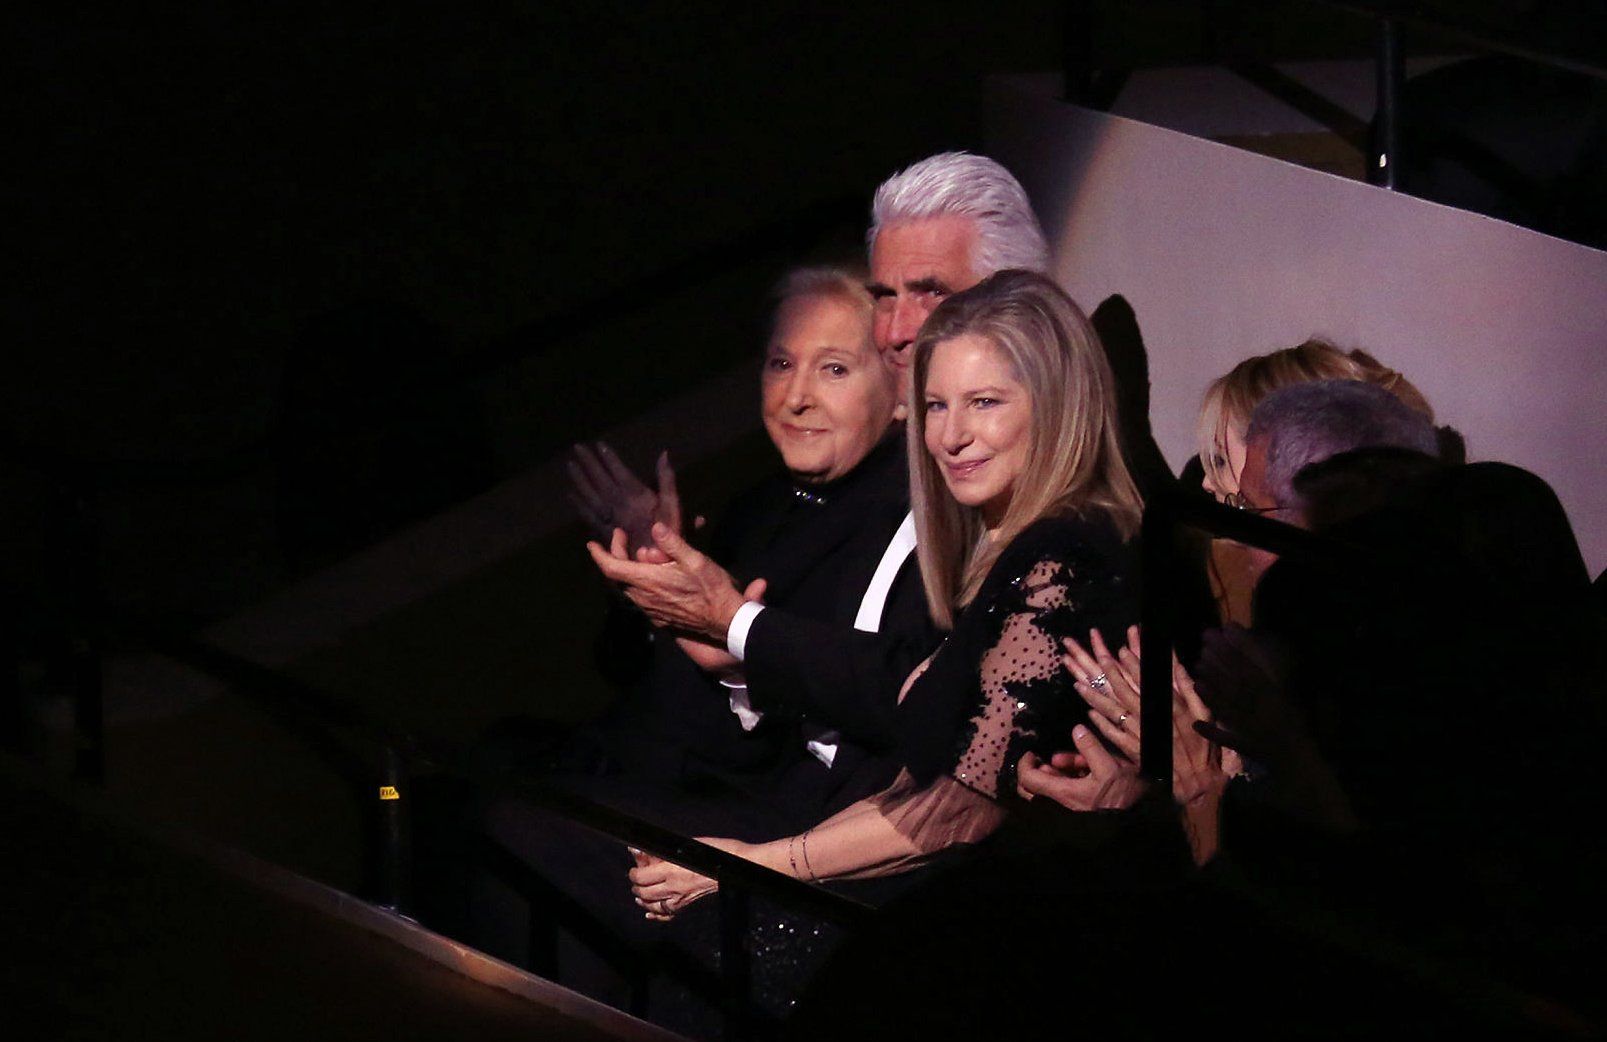 The lights come up on Barbra Streisand, James Brolin and the Bergmans in their box at the 2013 Chaplin Awards. Photo: Walter McBride